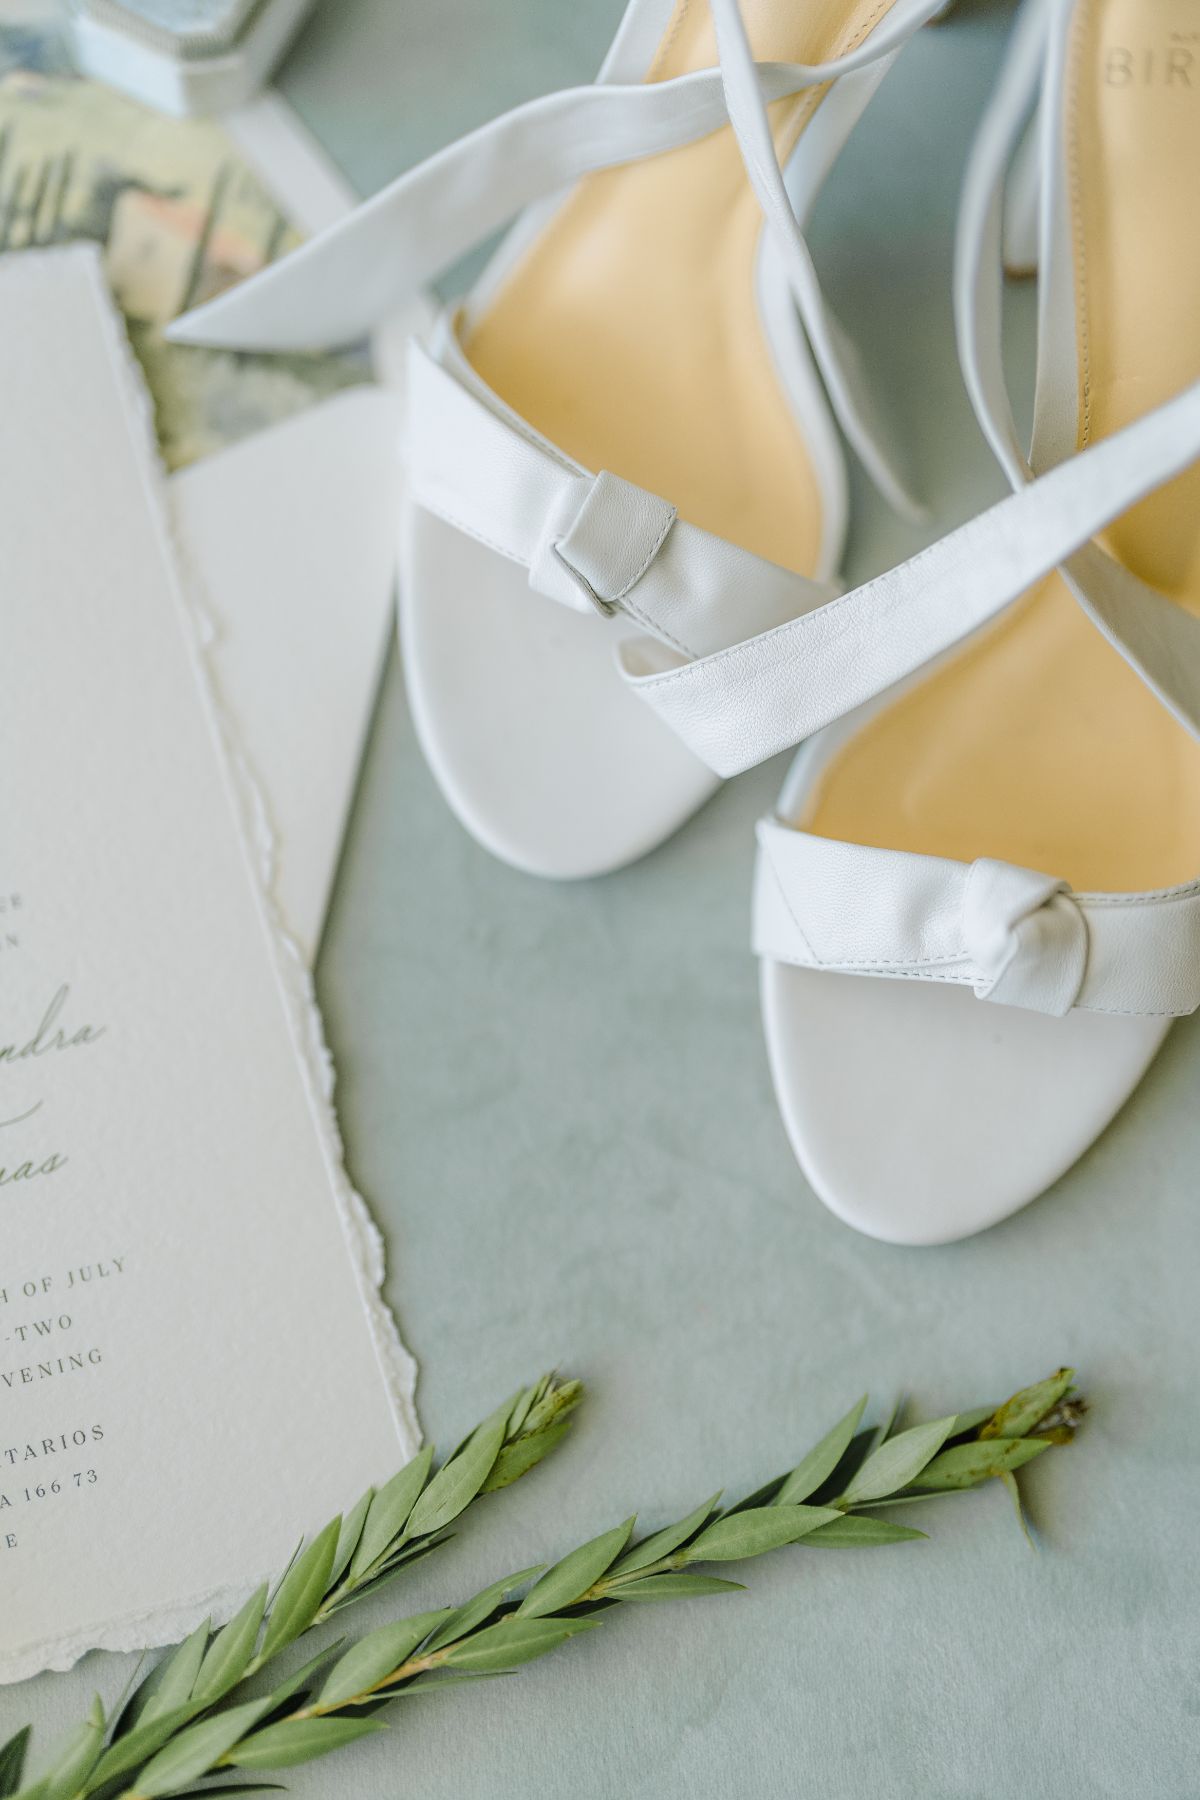 The Best Bridal Shoes, from Manolo Blahnik to Jimmy Choo